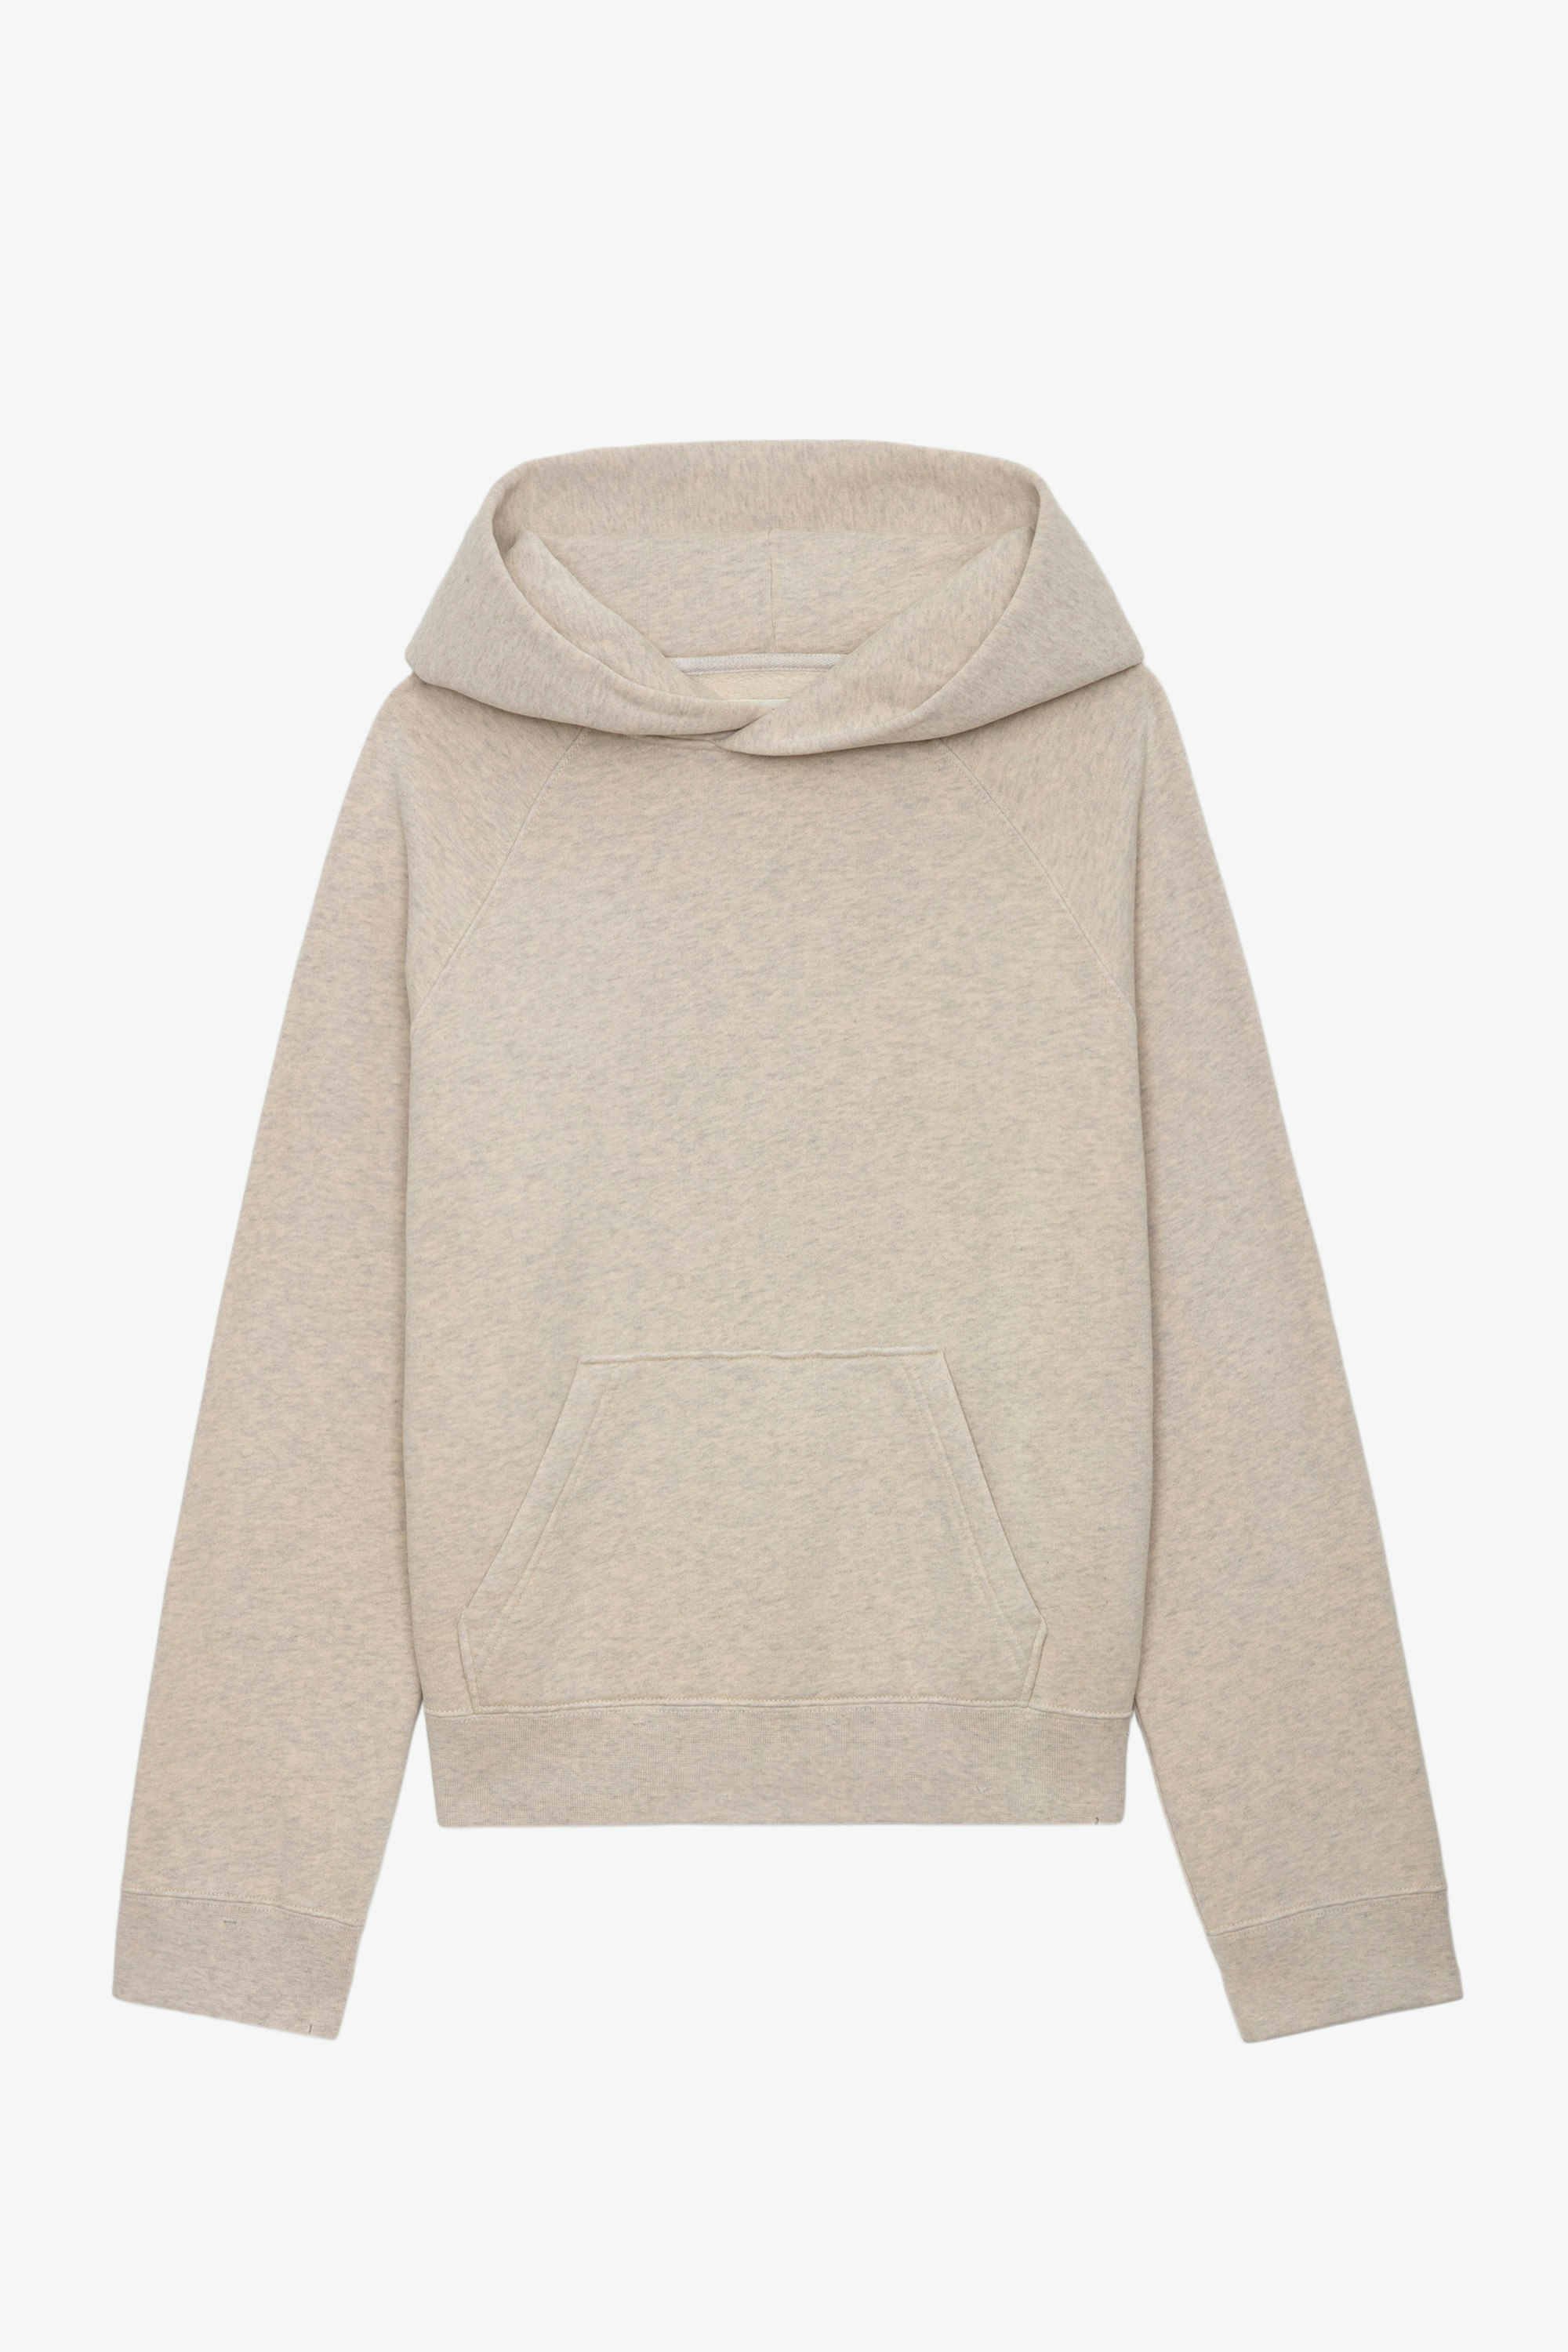 Georgy Photoprint Hoodie - Women's beige hoodie with Palmier photoprint on the back.